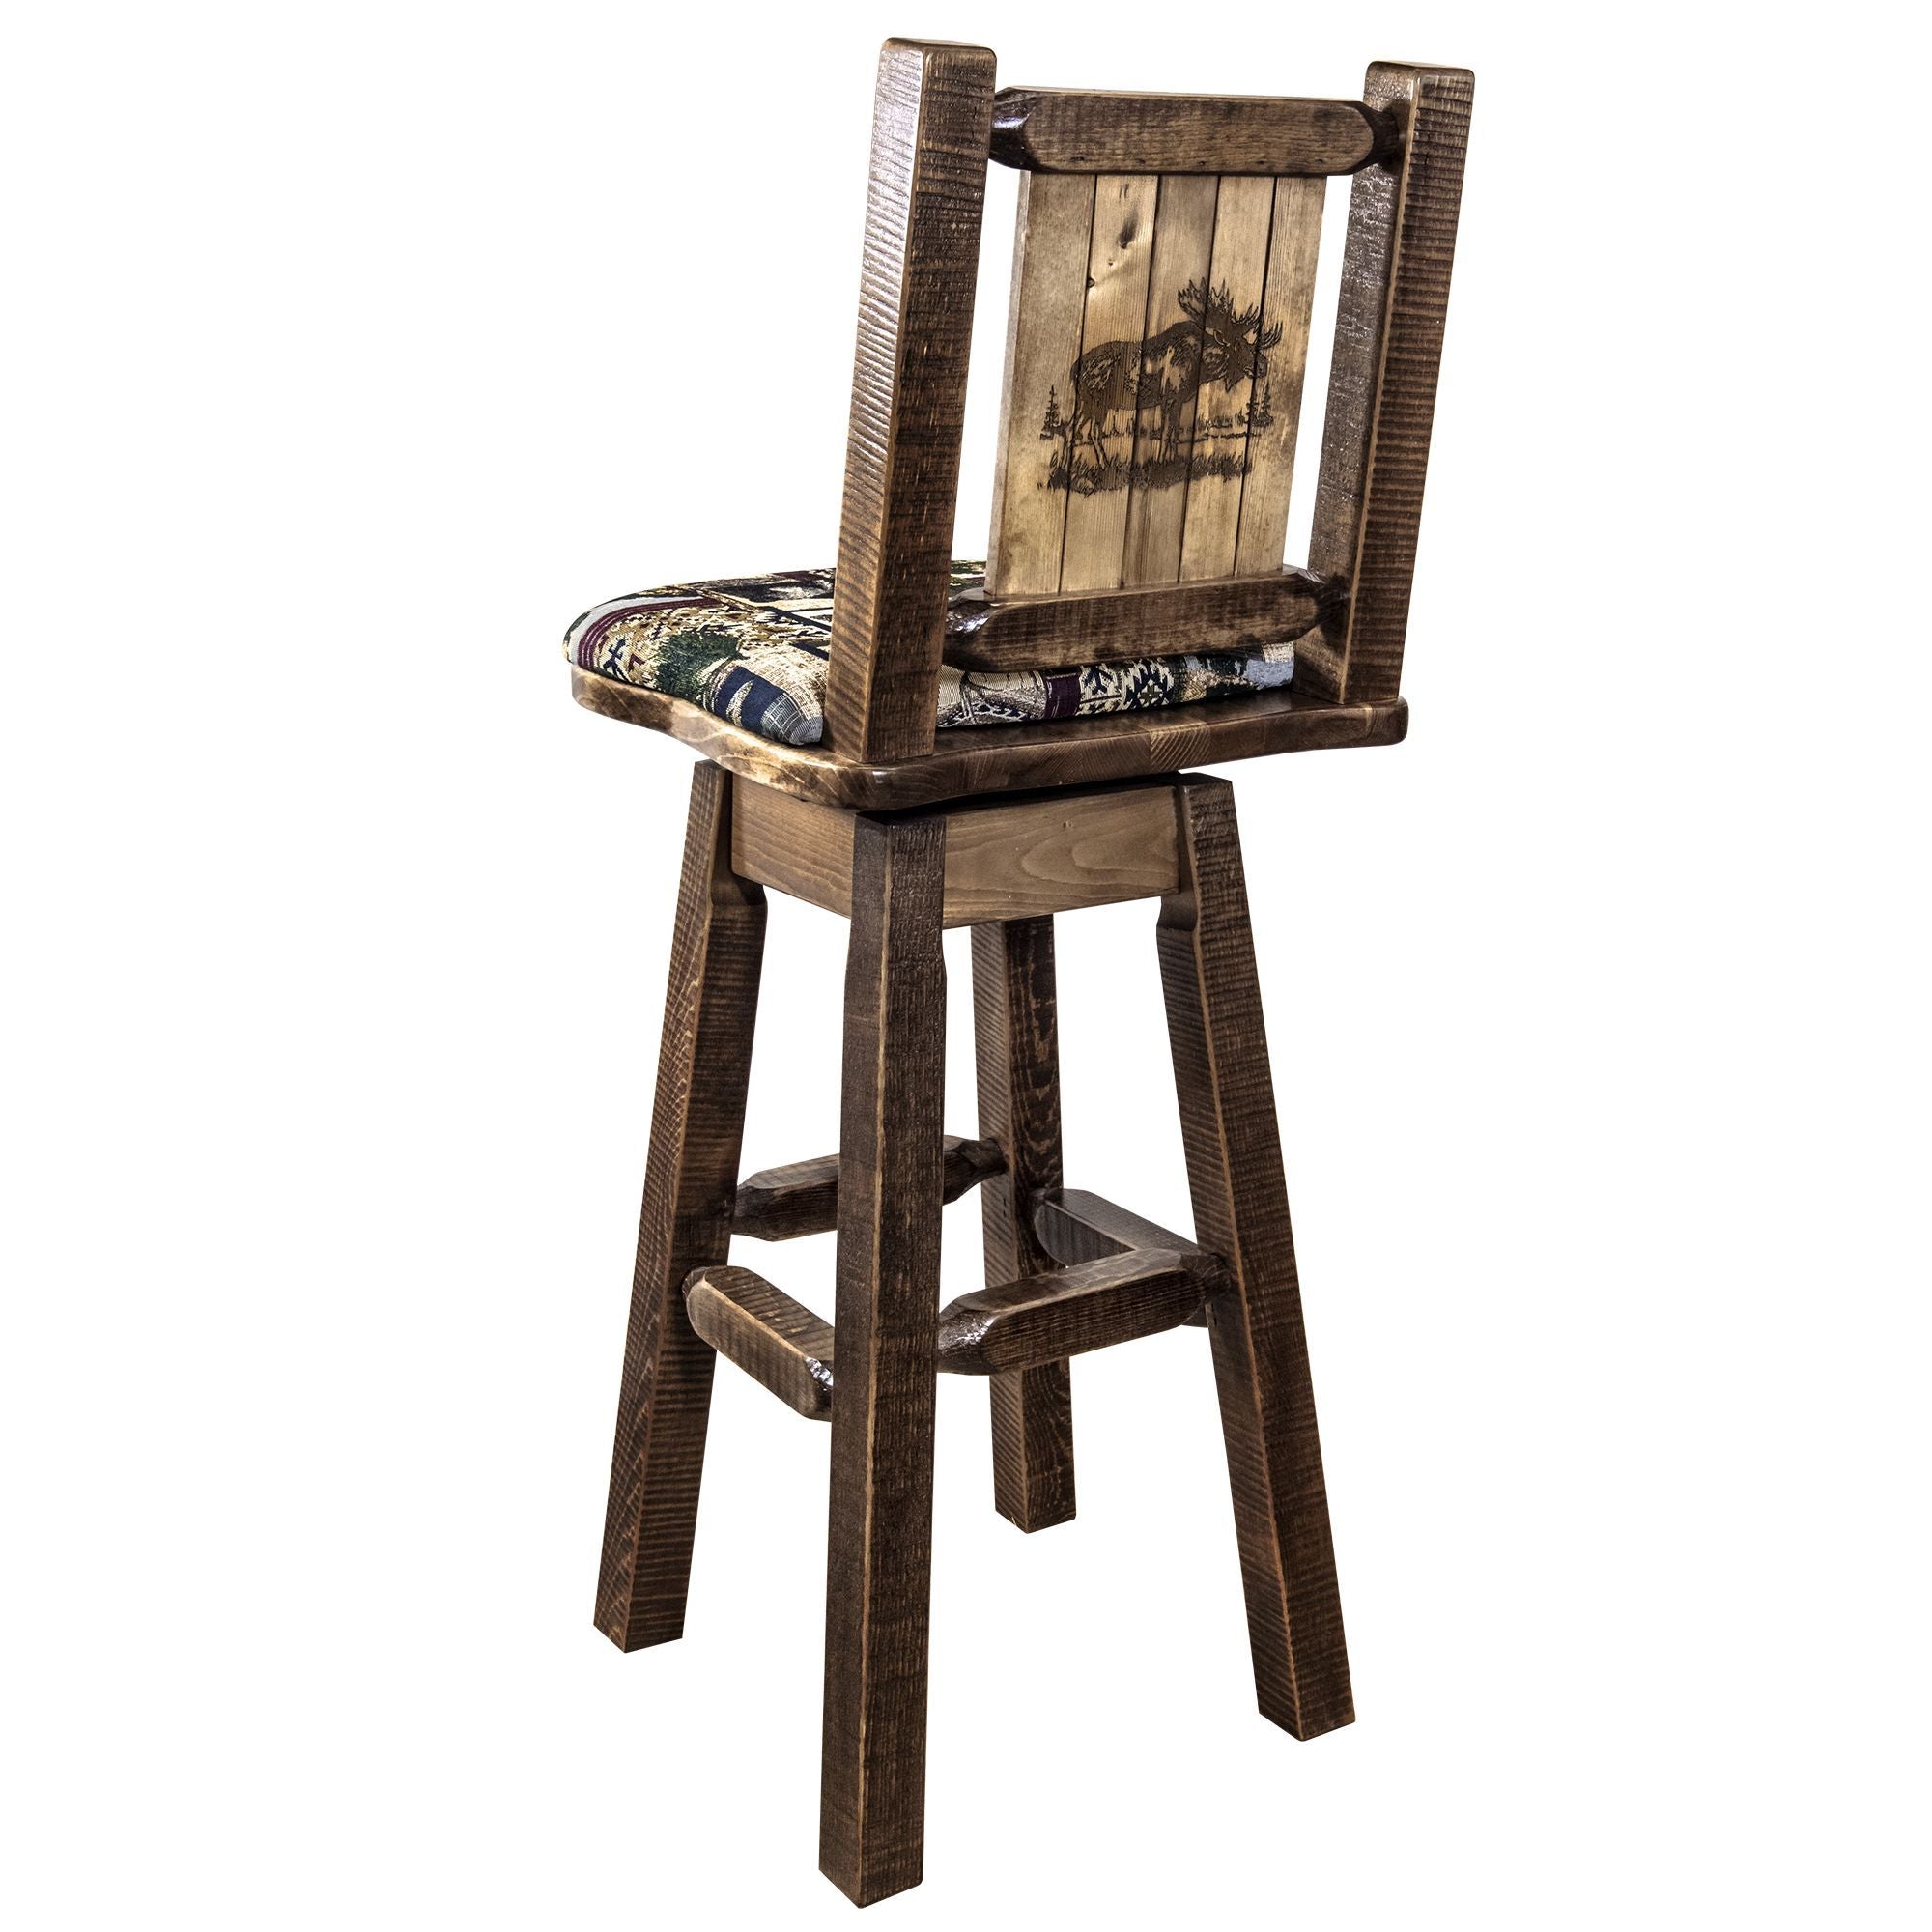 montana woodworks homestead collection barstool with back and swivel woodland pattern upholstery and laser engraved moose design mwhcbswsnrslmoose back